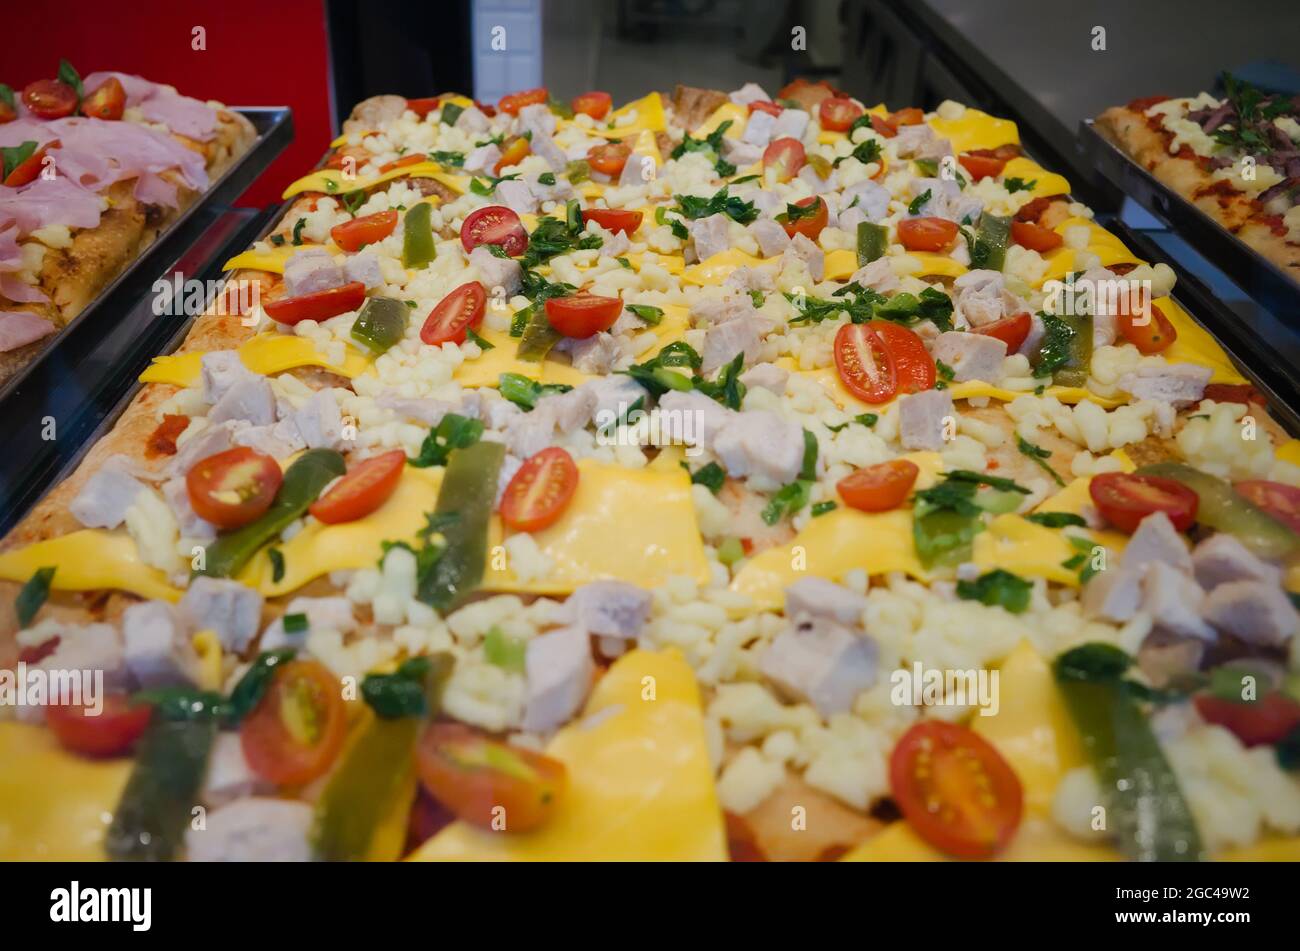 Square Sicilian pizza called Sfinchini on a tray in fast food restaurant. Square pizza with cherry tomatoes, cheese, cucumbers and chicken. Stock Photo